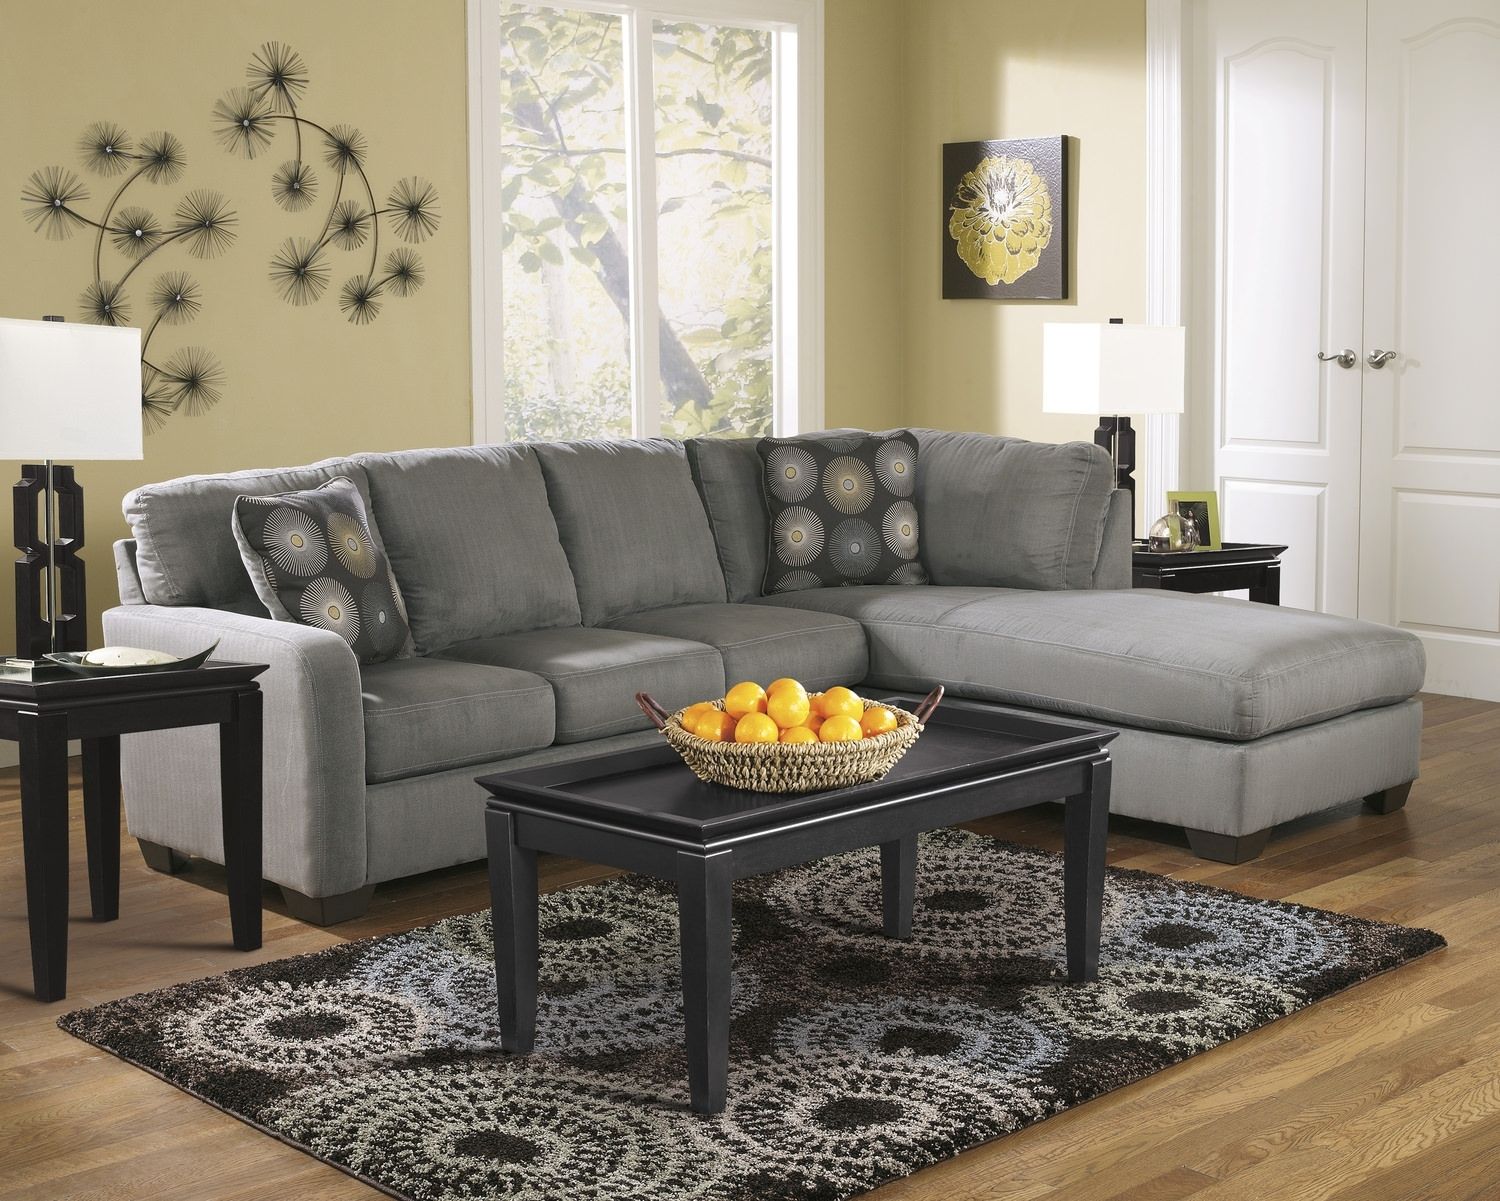 Zella 2 Piece Modular Sectional | Dock86 Intended For Dock 86 Sectional Sofas (View 8 of 10)